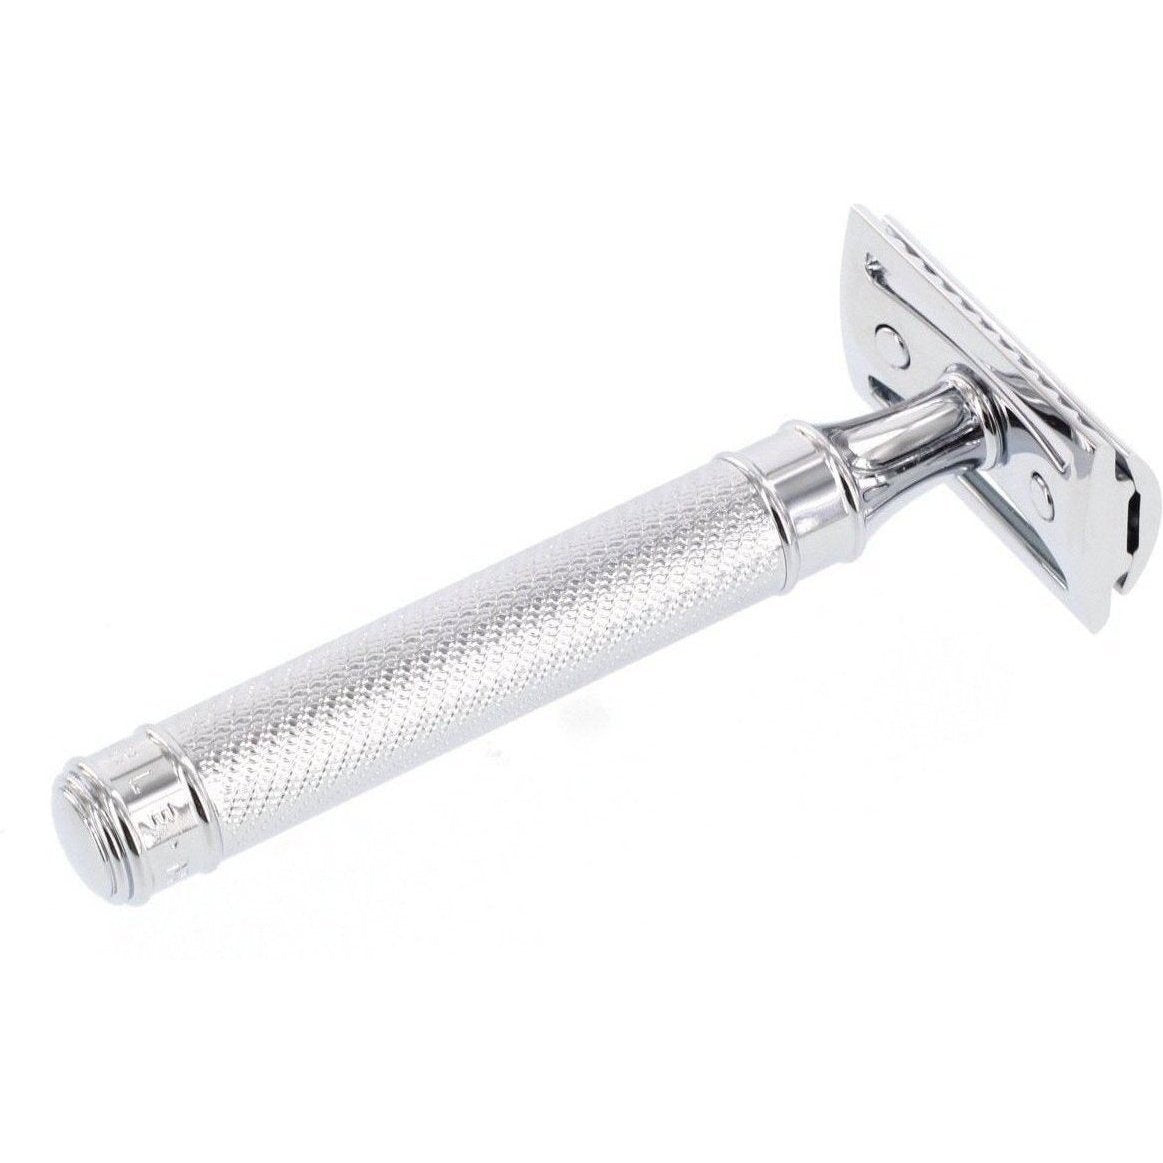 A stainless steel Mühle R89 Closed Comb Safety Razor from KirbyAllison.com on a white background.